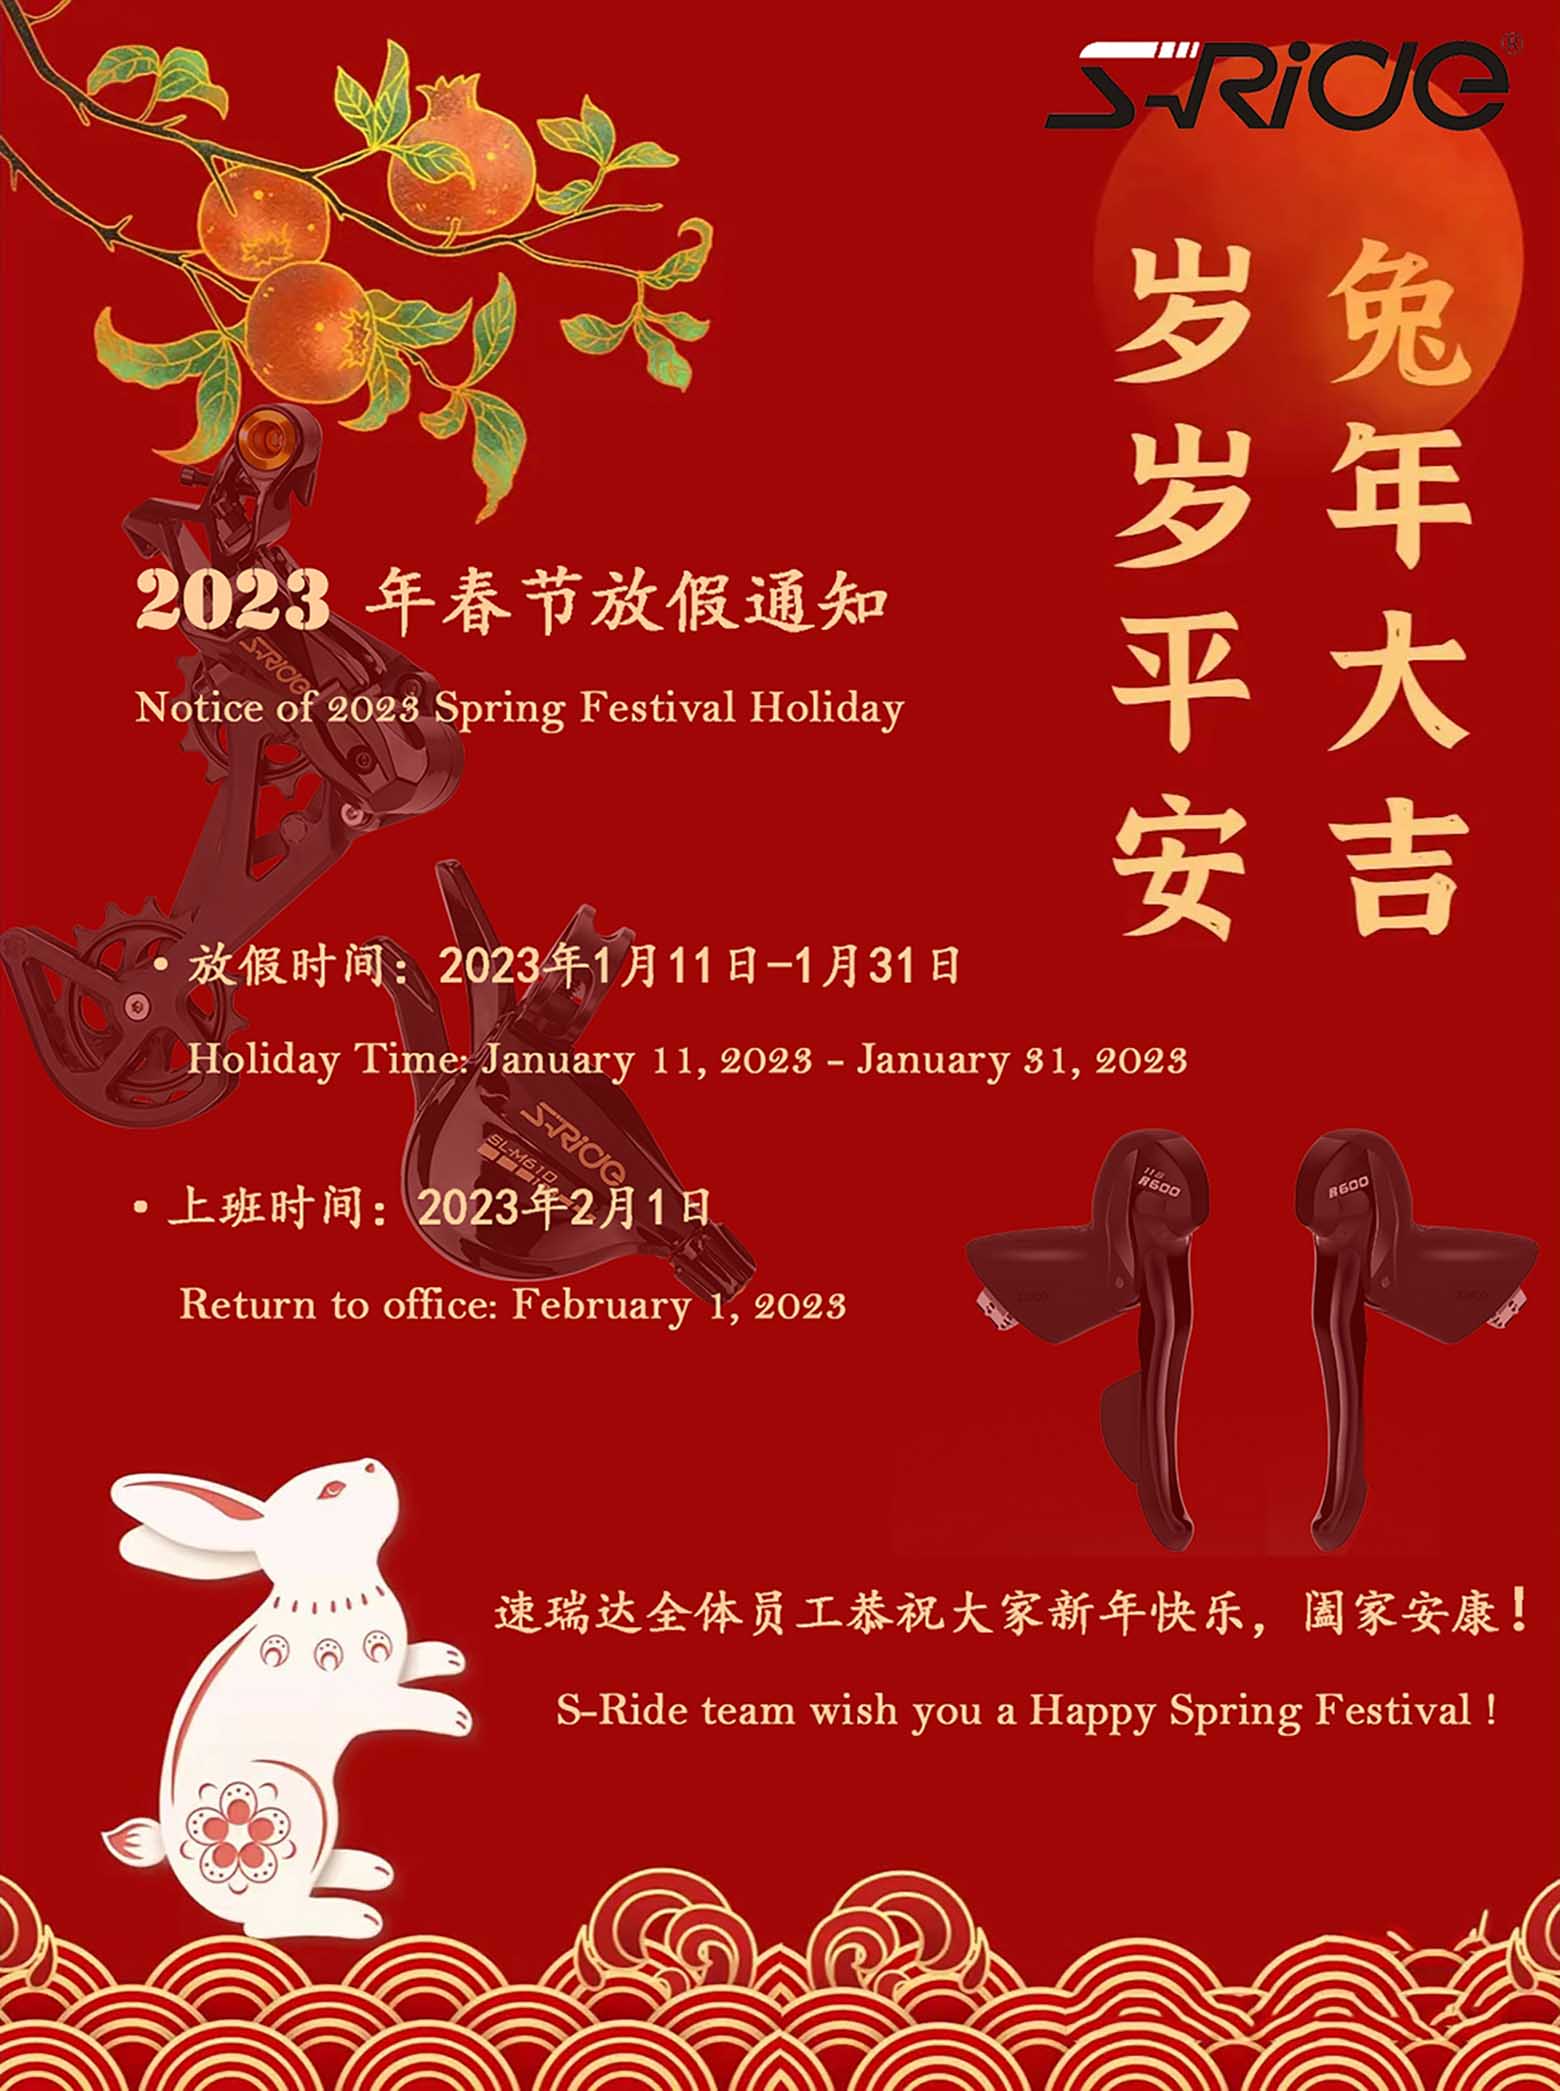 S-Ride - Notice of 2023 Spring Festival Holiday main image